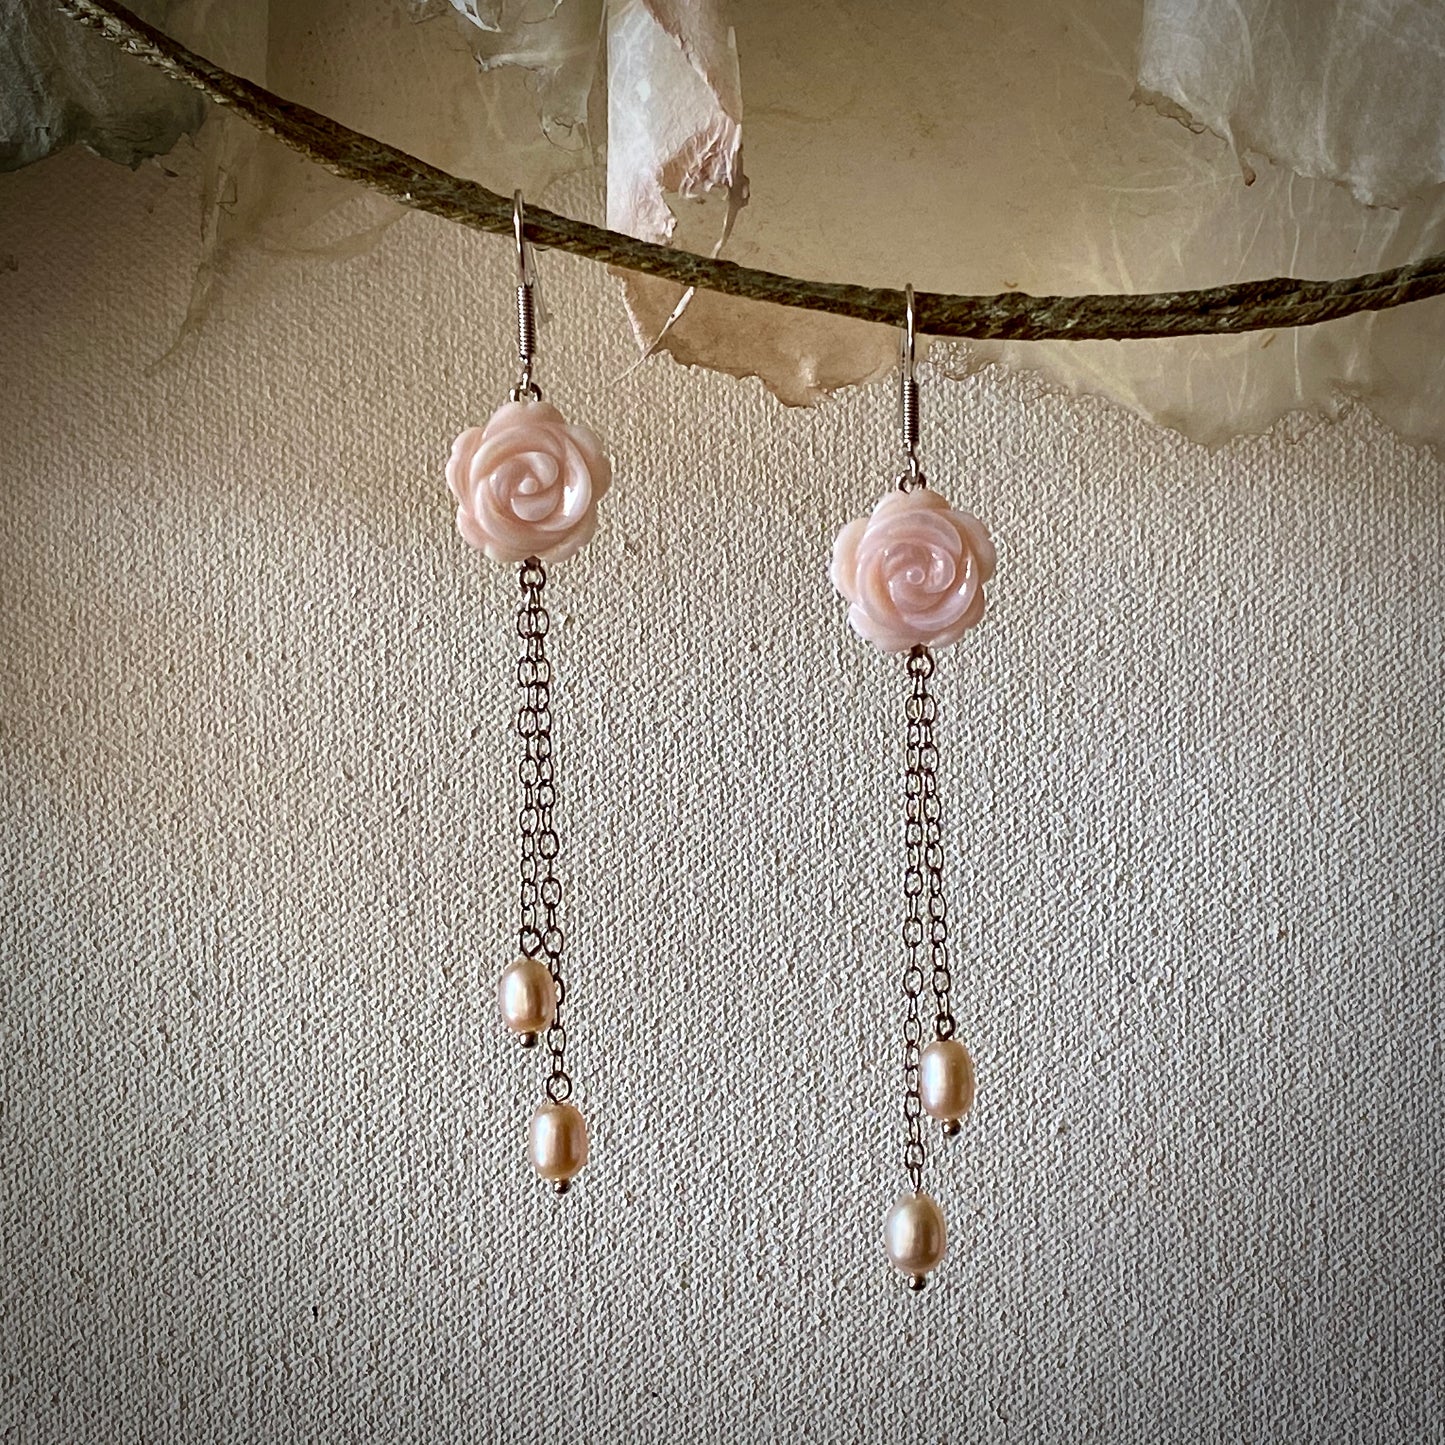 Floral Carved Natural Pink Mother of Pearl Long Dangle Earrings with Pink Cultured Freshwater Pearls / Rhodium-Plated 925 Sterling Silver